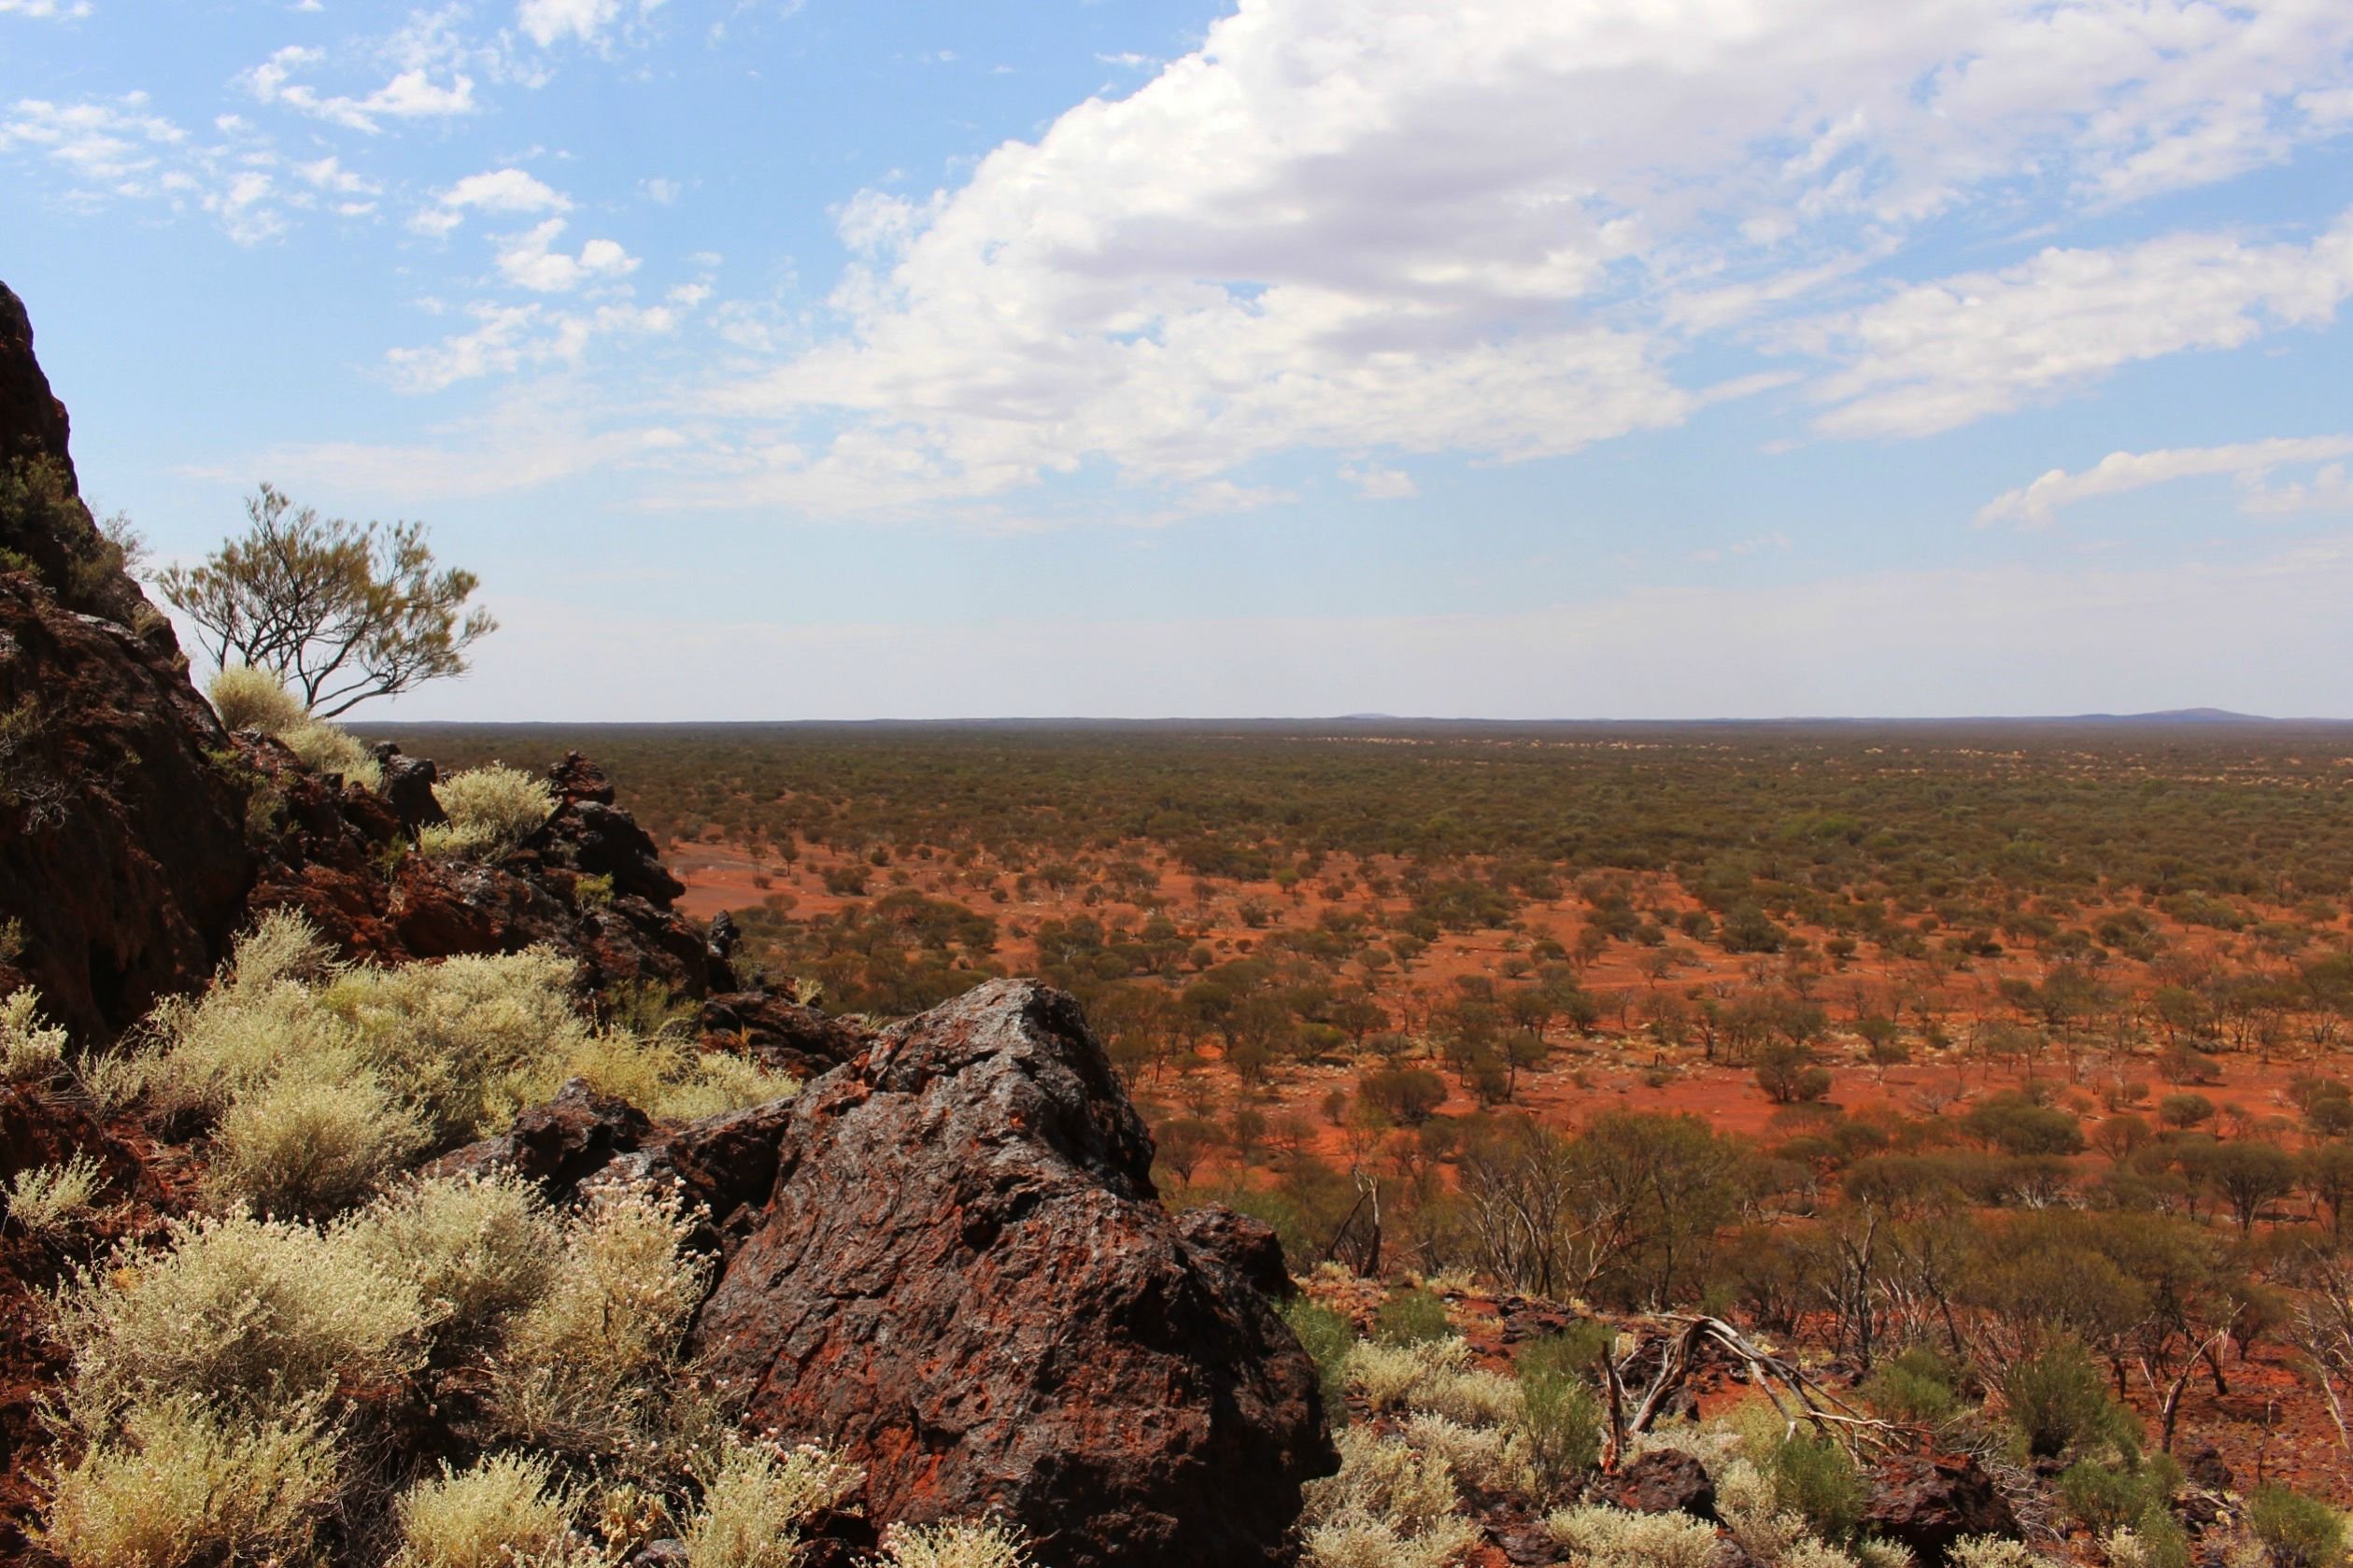 Outback 4K wallpaper for your desktop or mobile screen free and easy to download